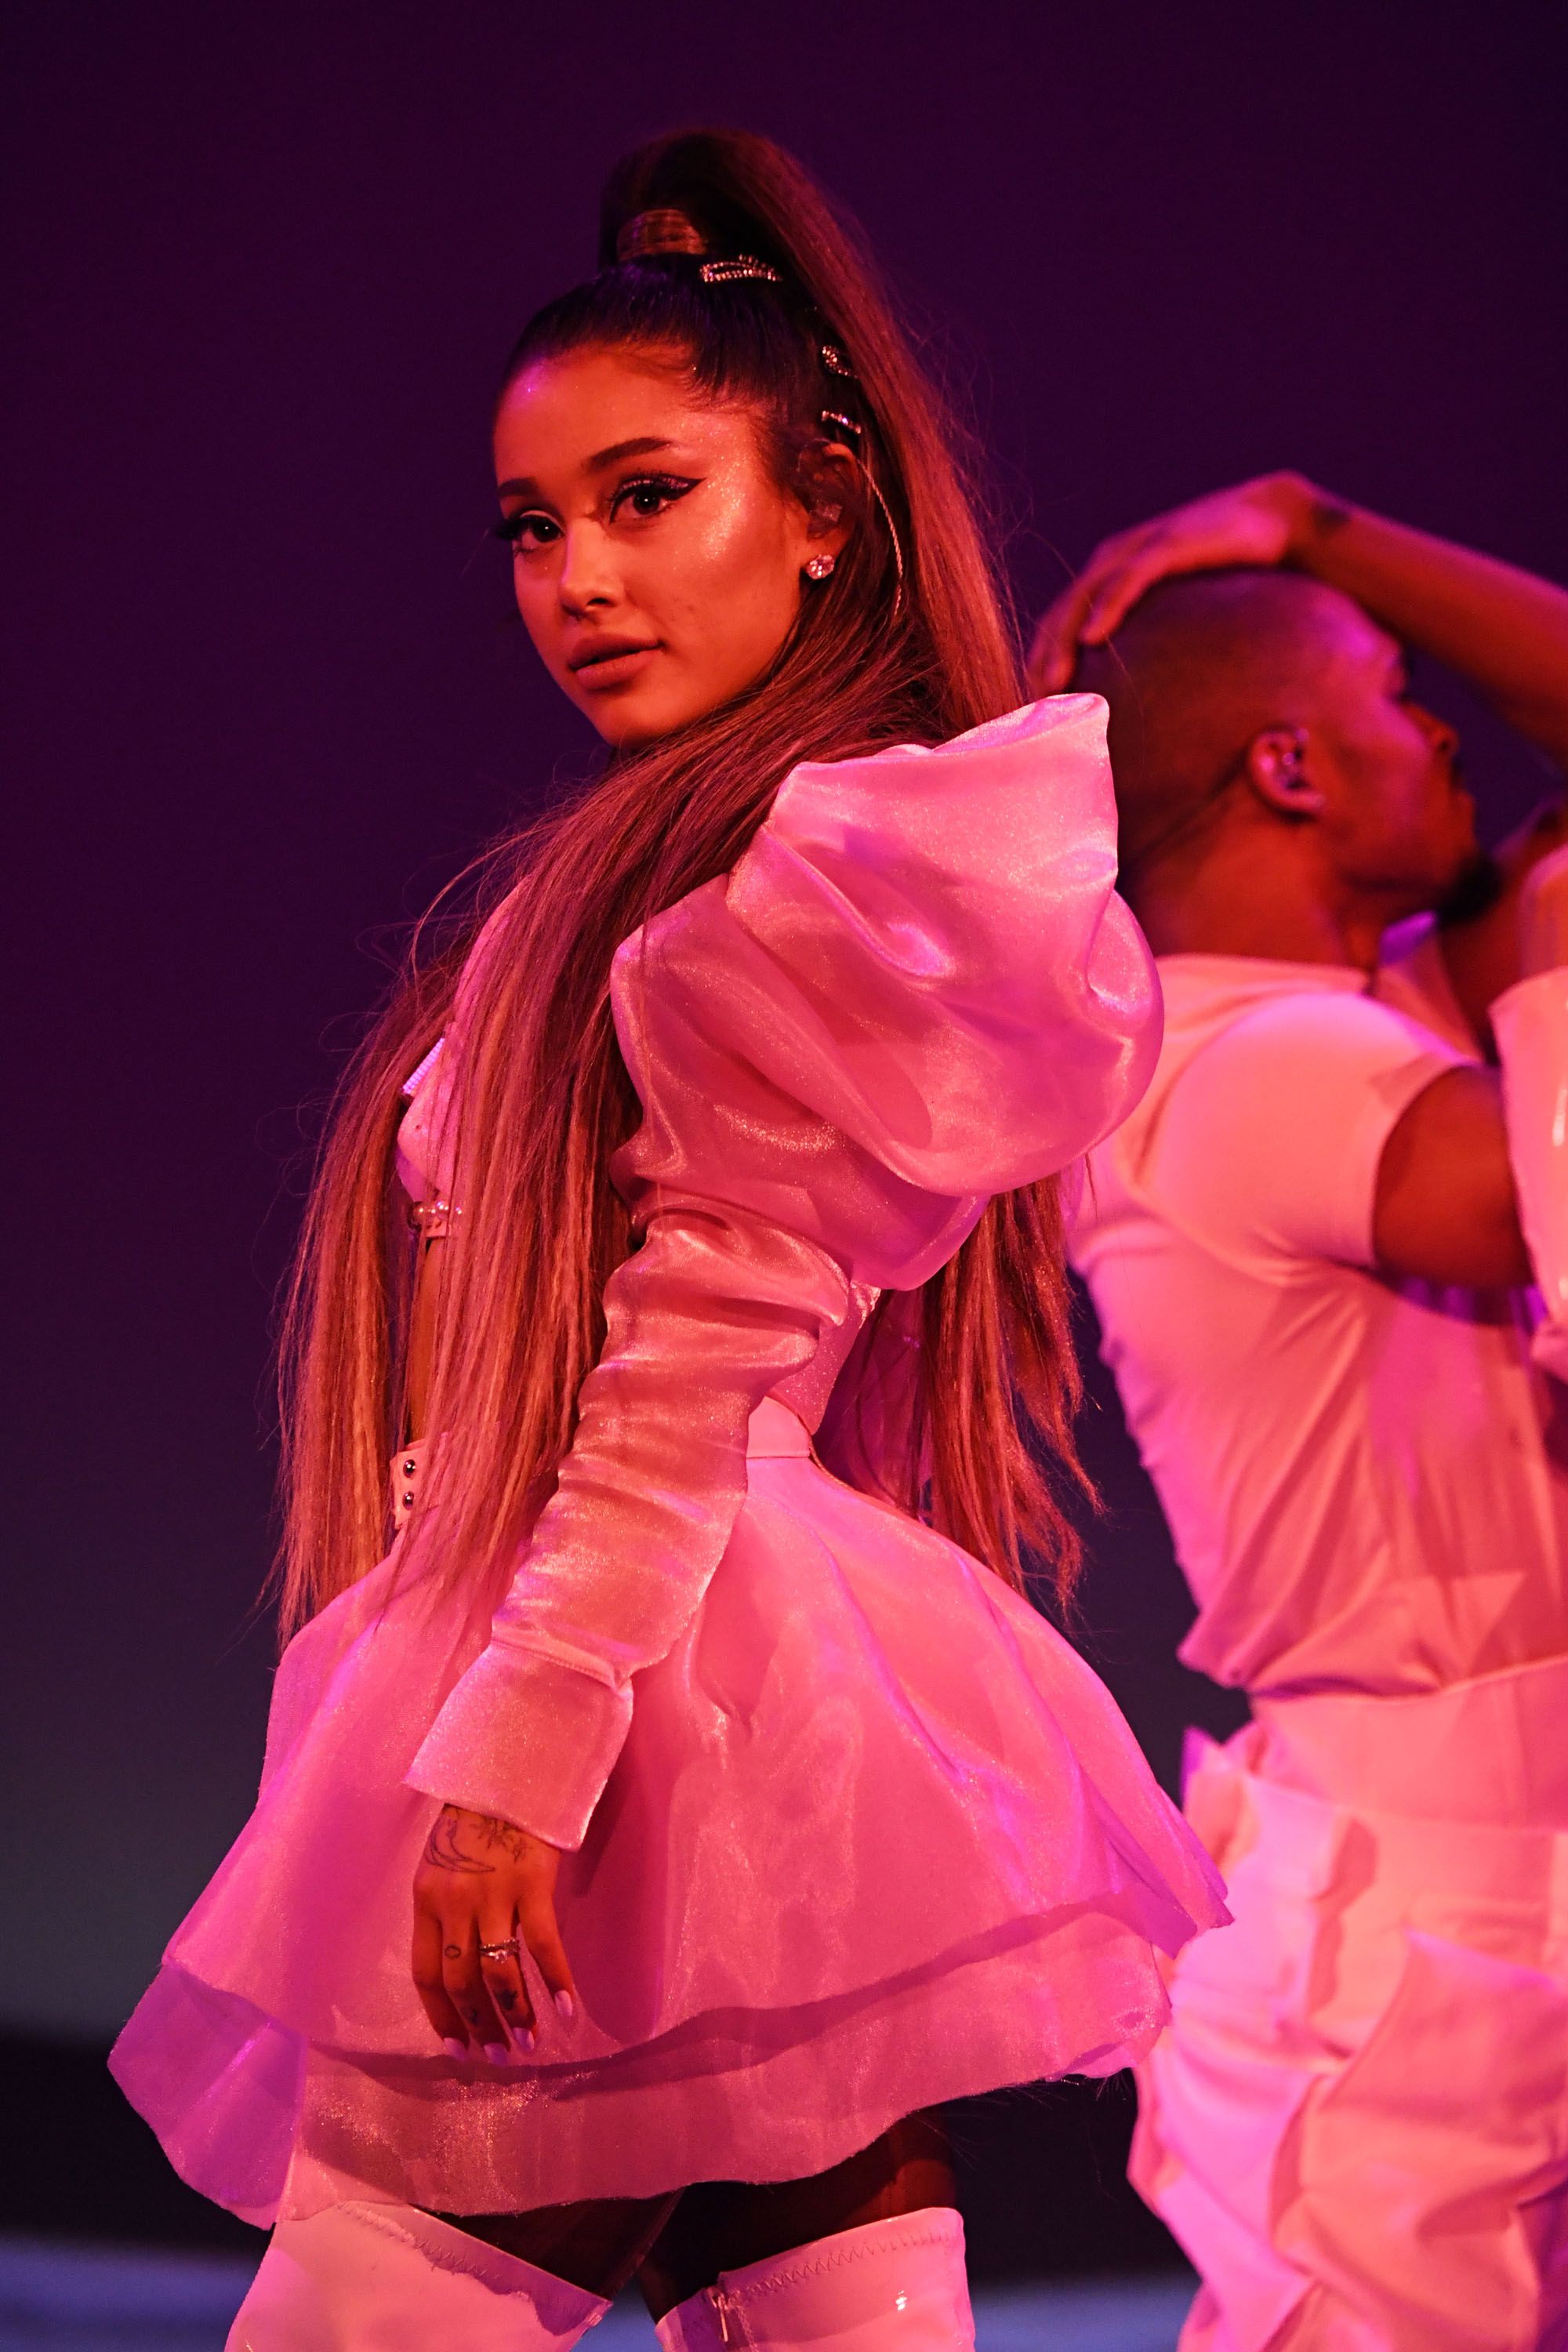 Break Up With Your Girlfriend Lyrics Decoded Ariana Grande Song